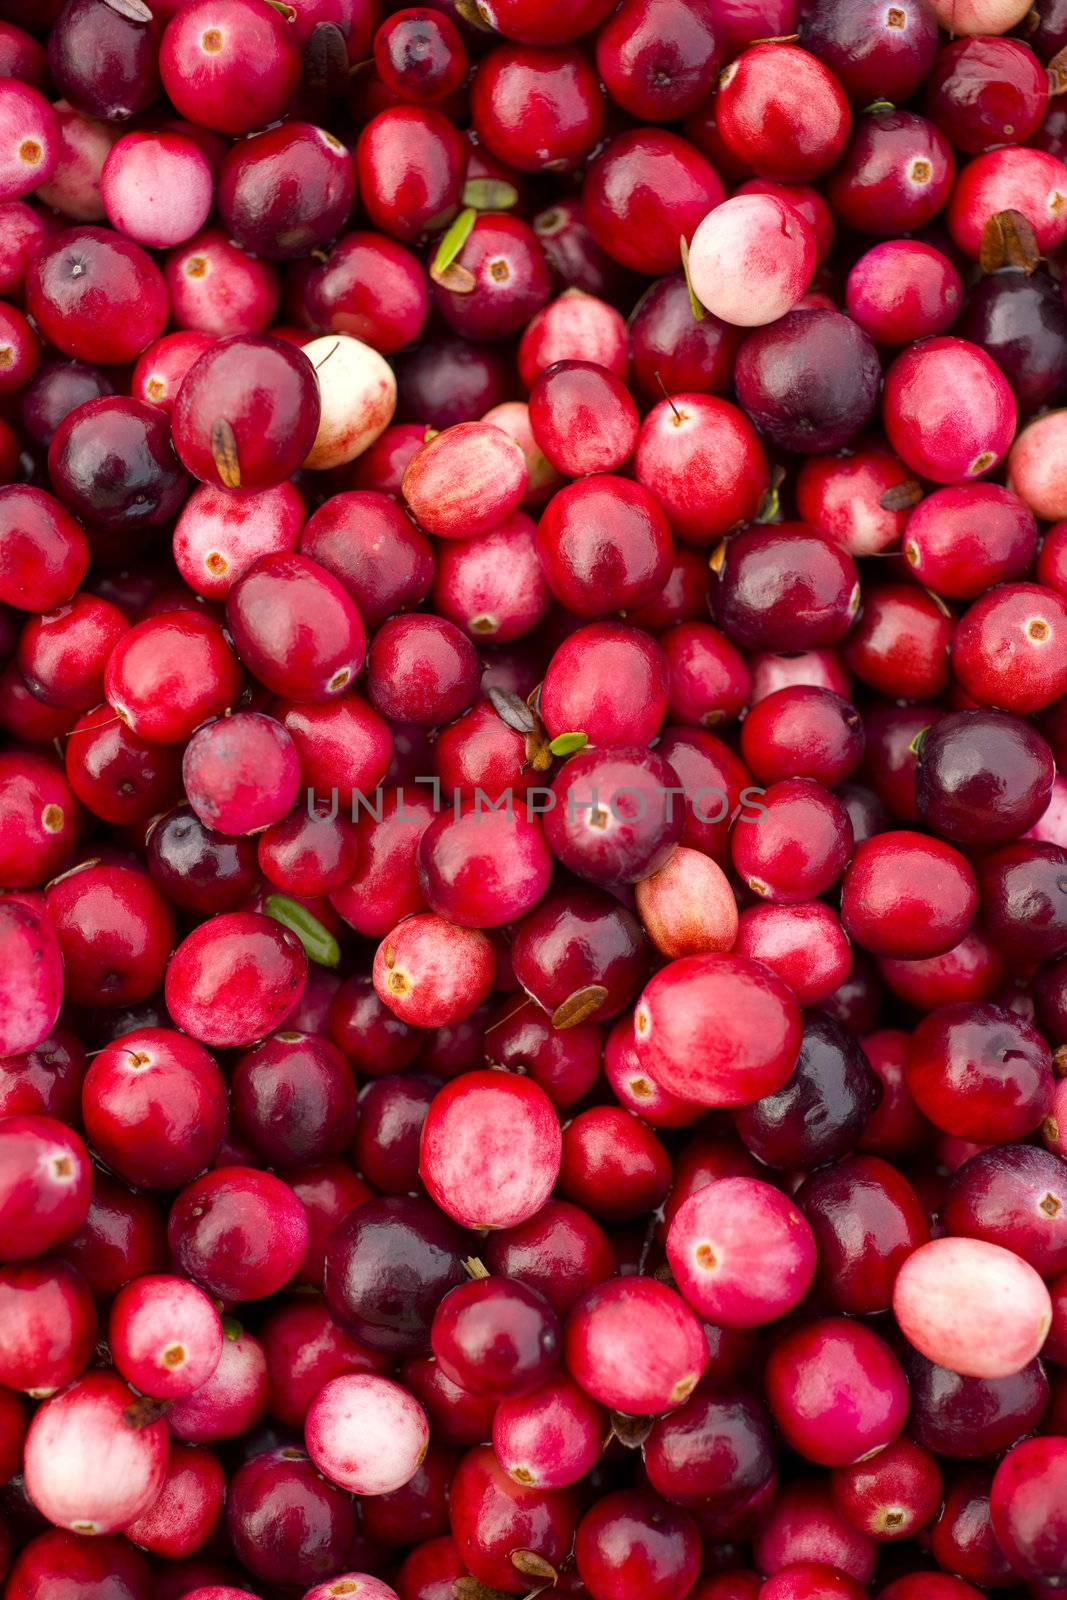 Cranberries by ChrisBoswell